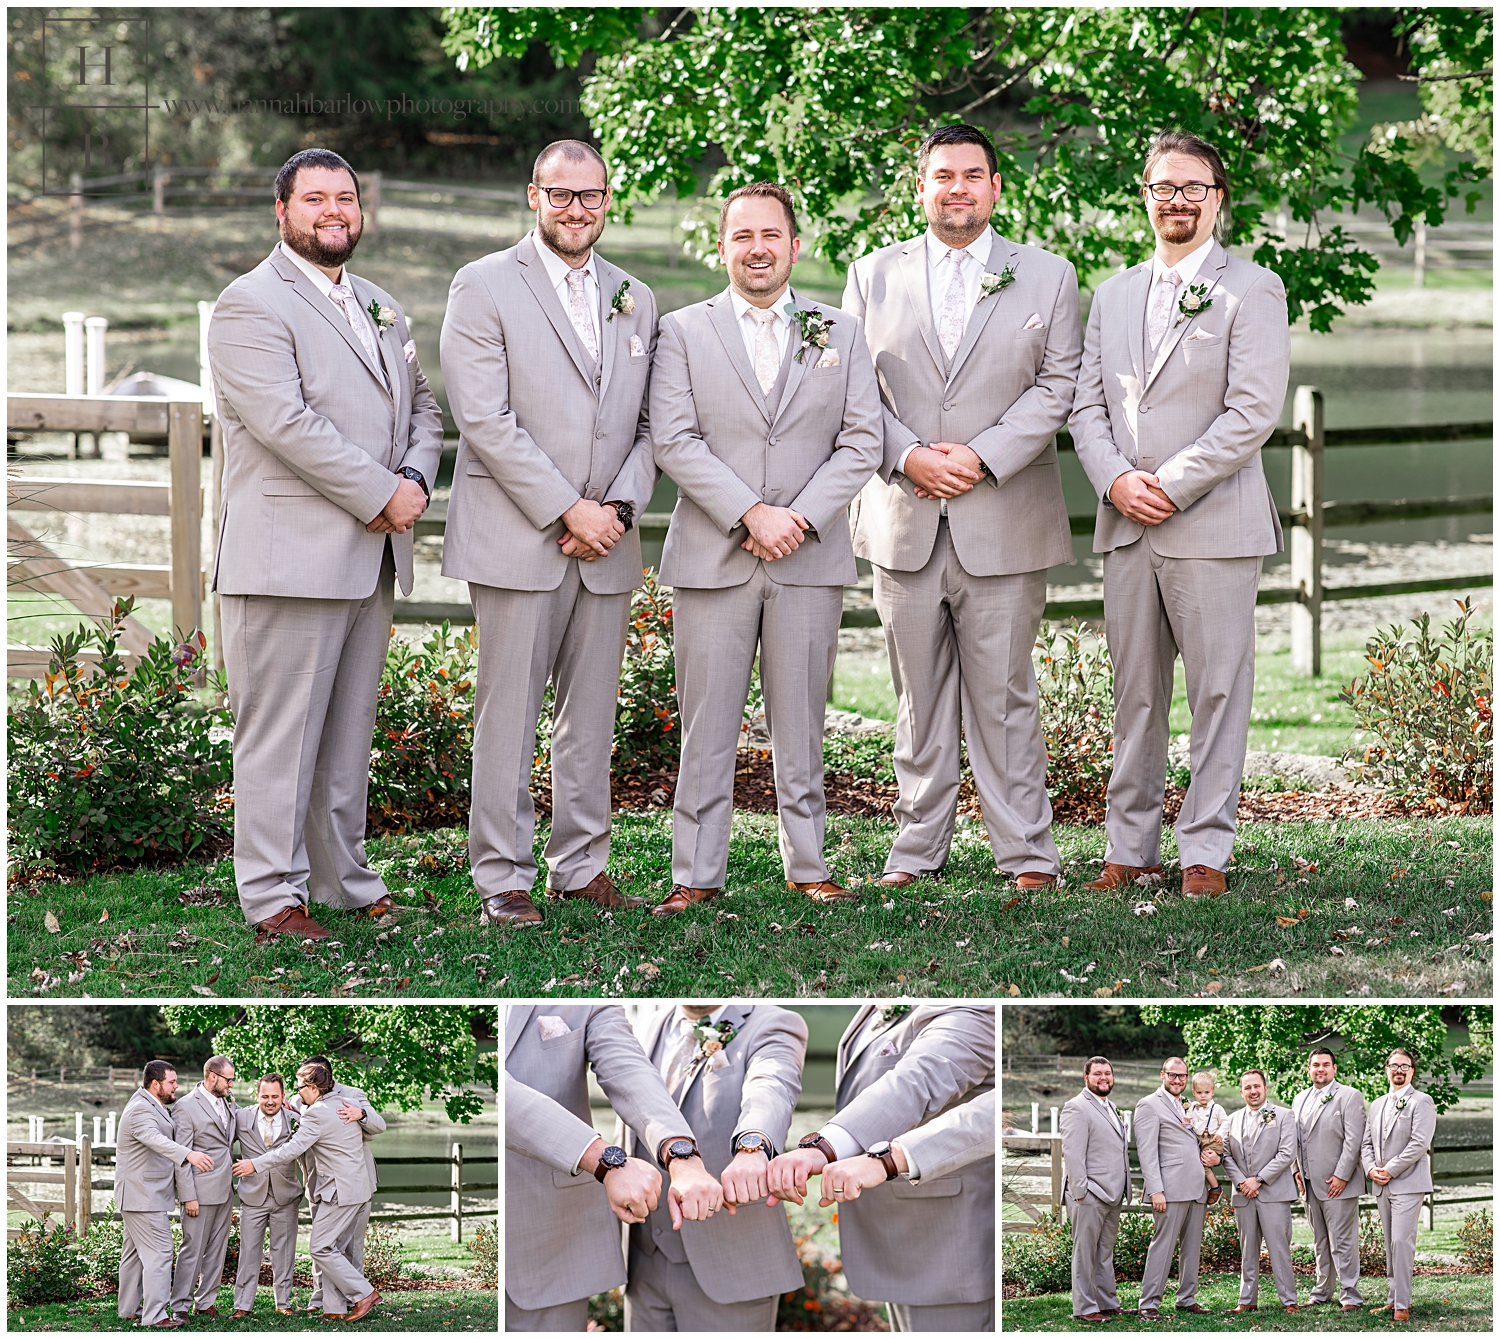 Groomsmen in tan tuxes pose with groom.